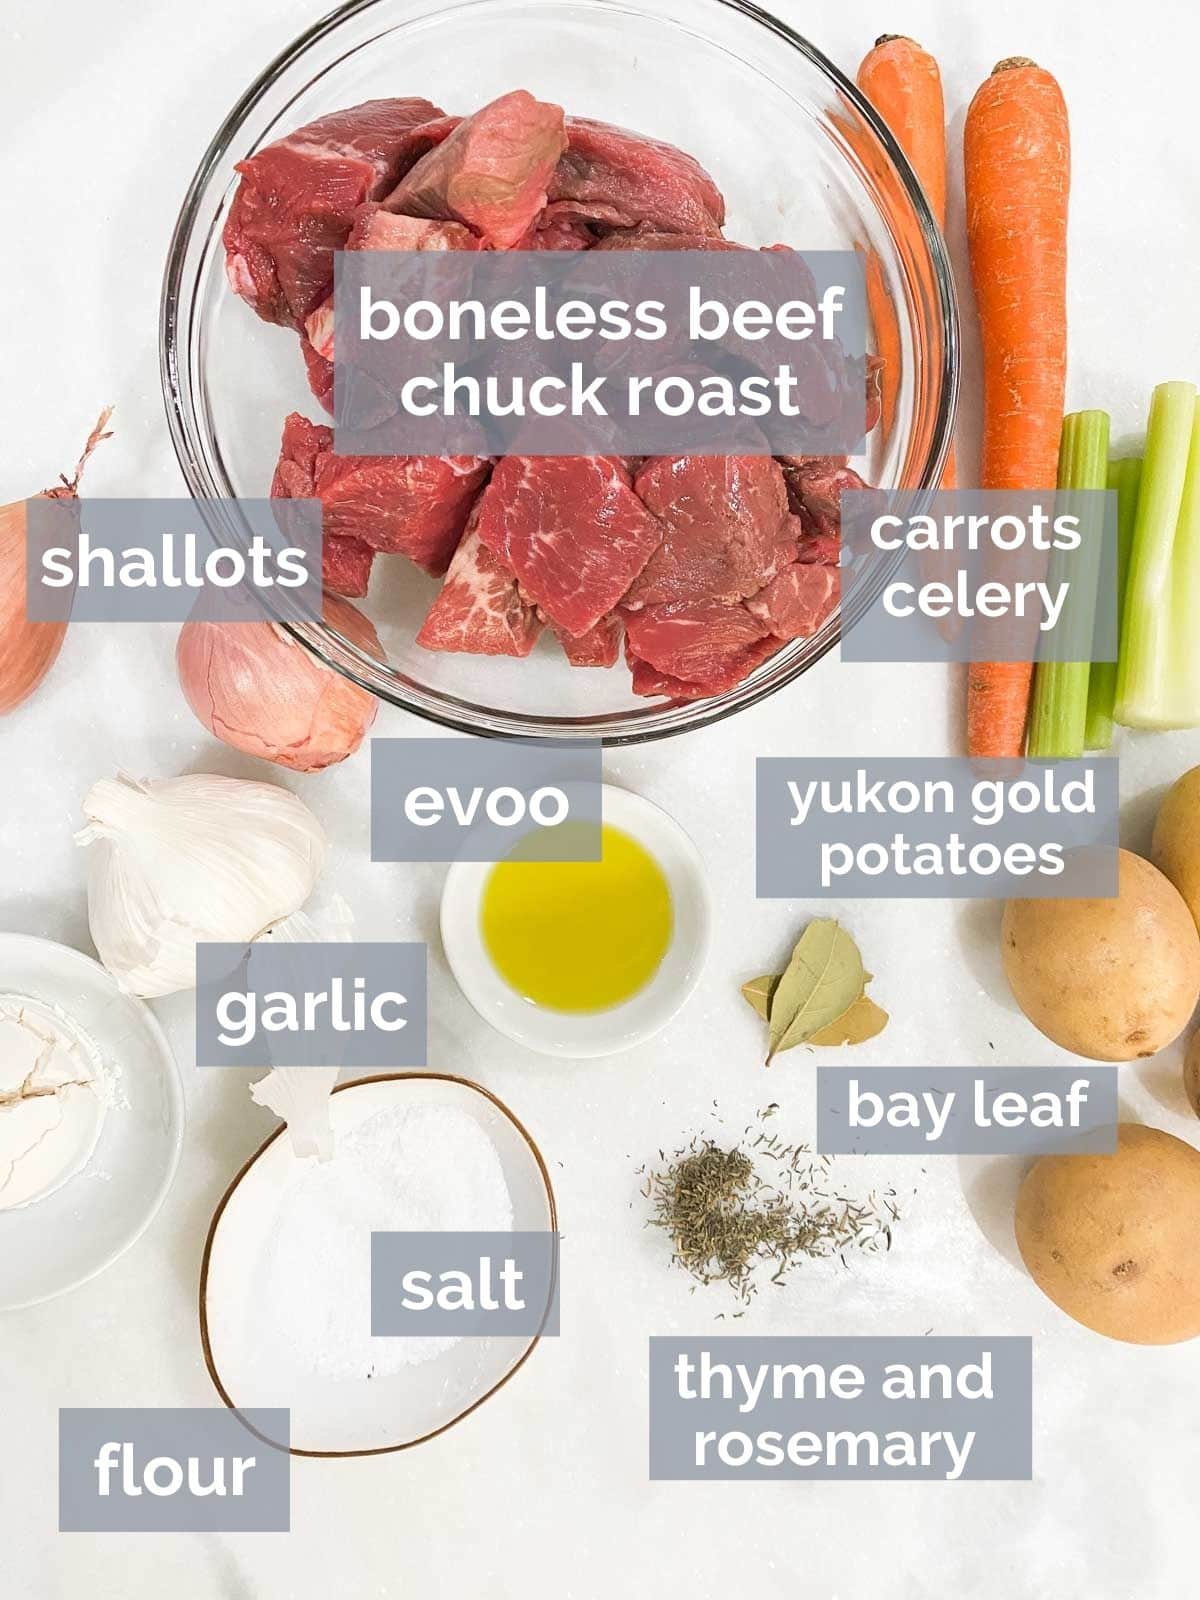 Beef chuck roast, carrots, celery, spices, and potatoes on a white table